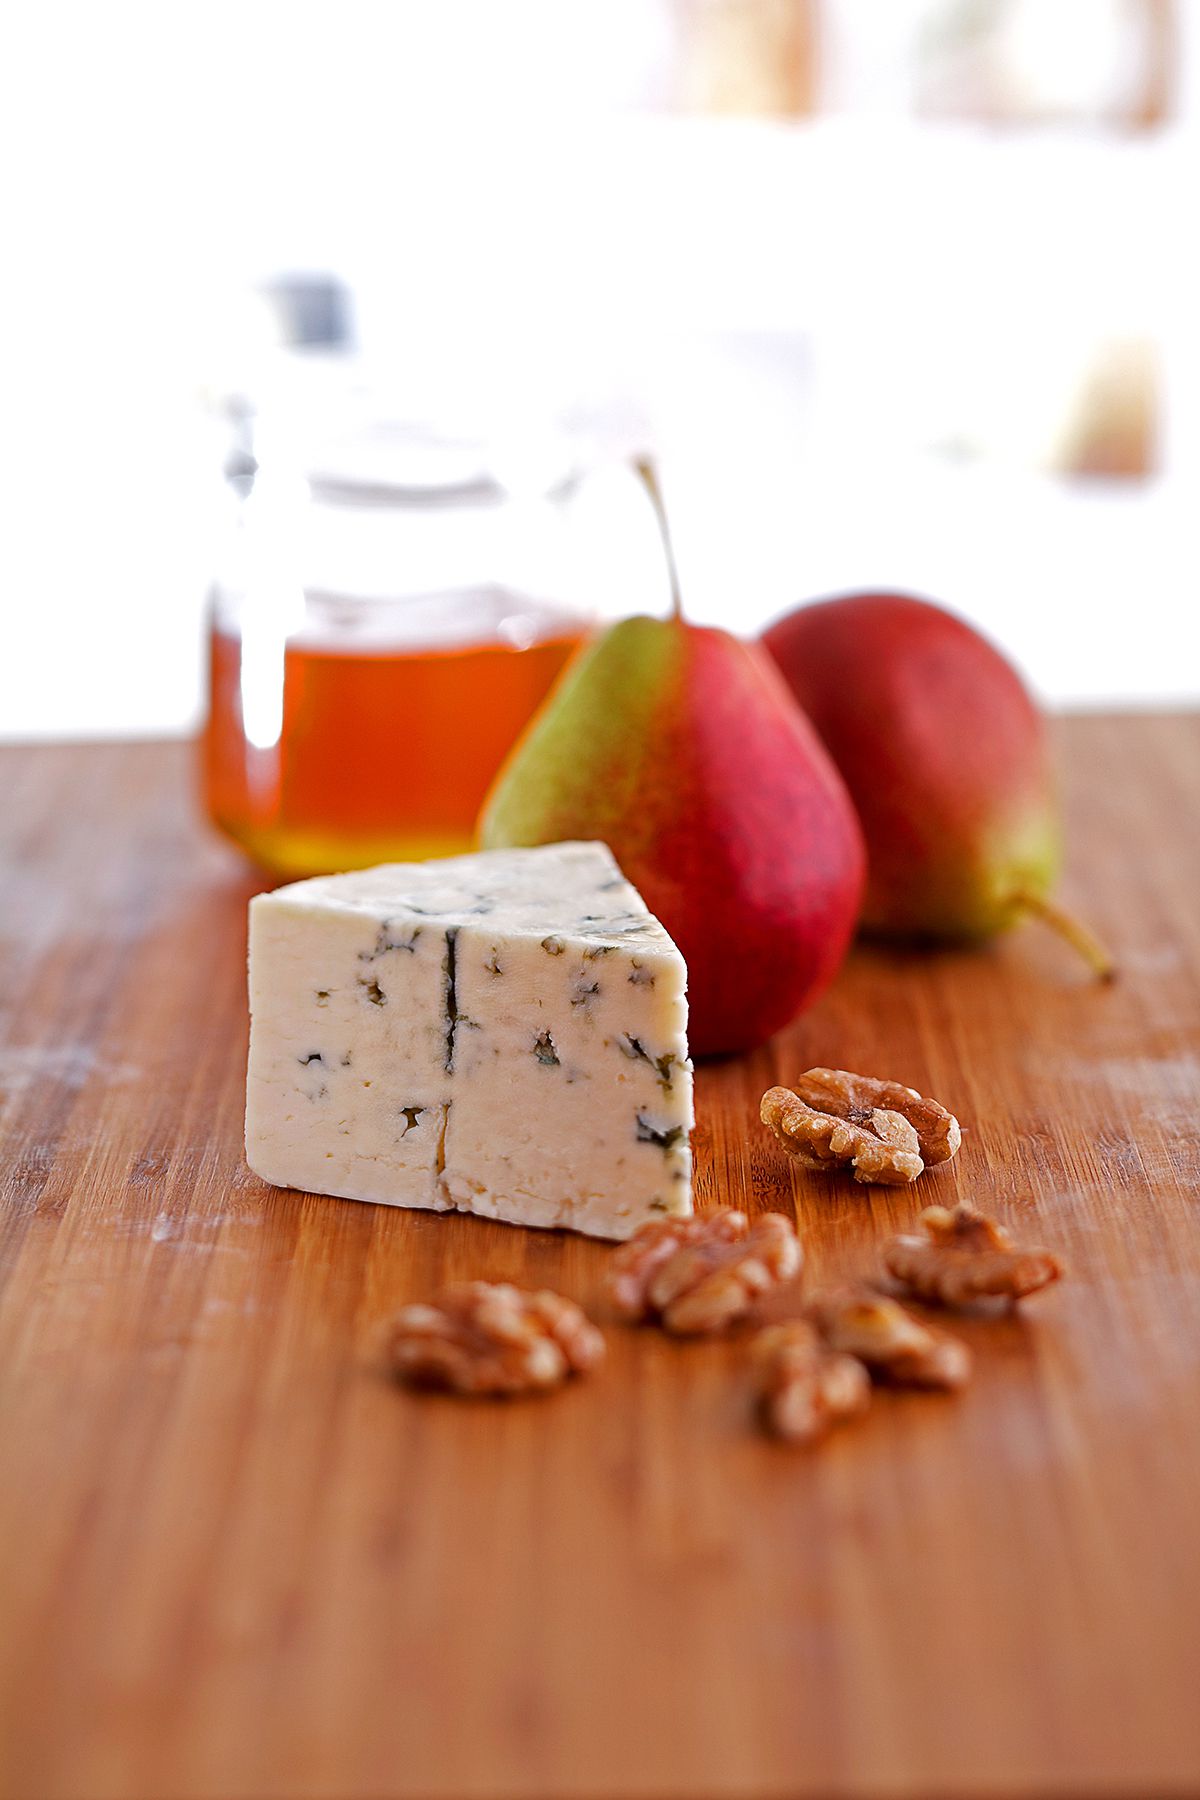 Wedge of blue cheese with a pear and pecans on wooden table